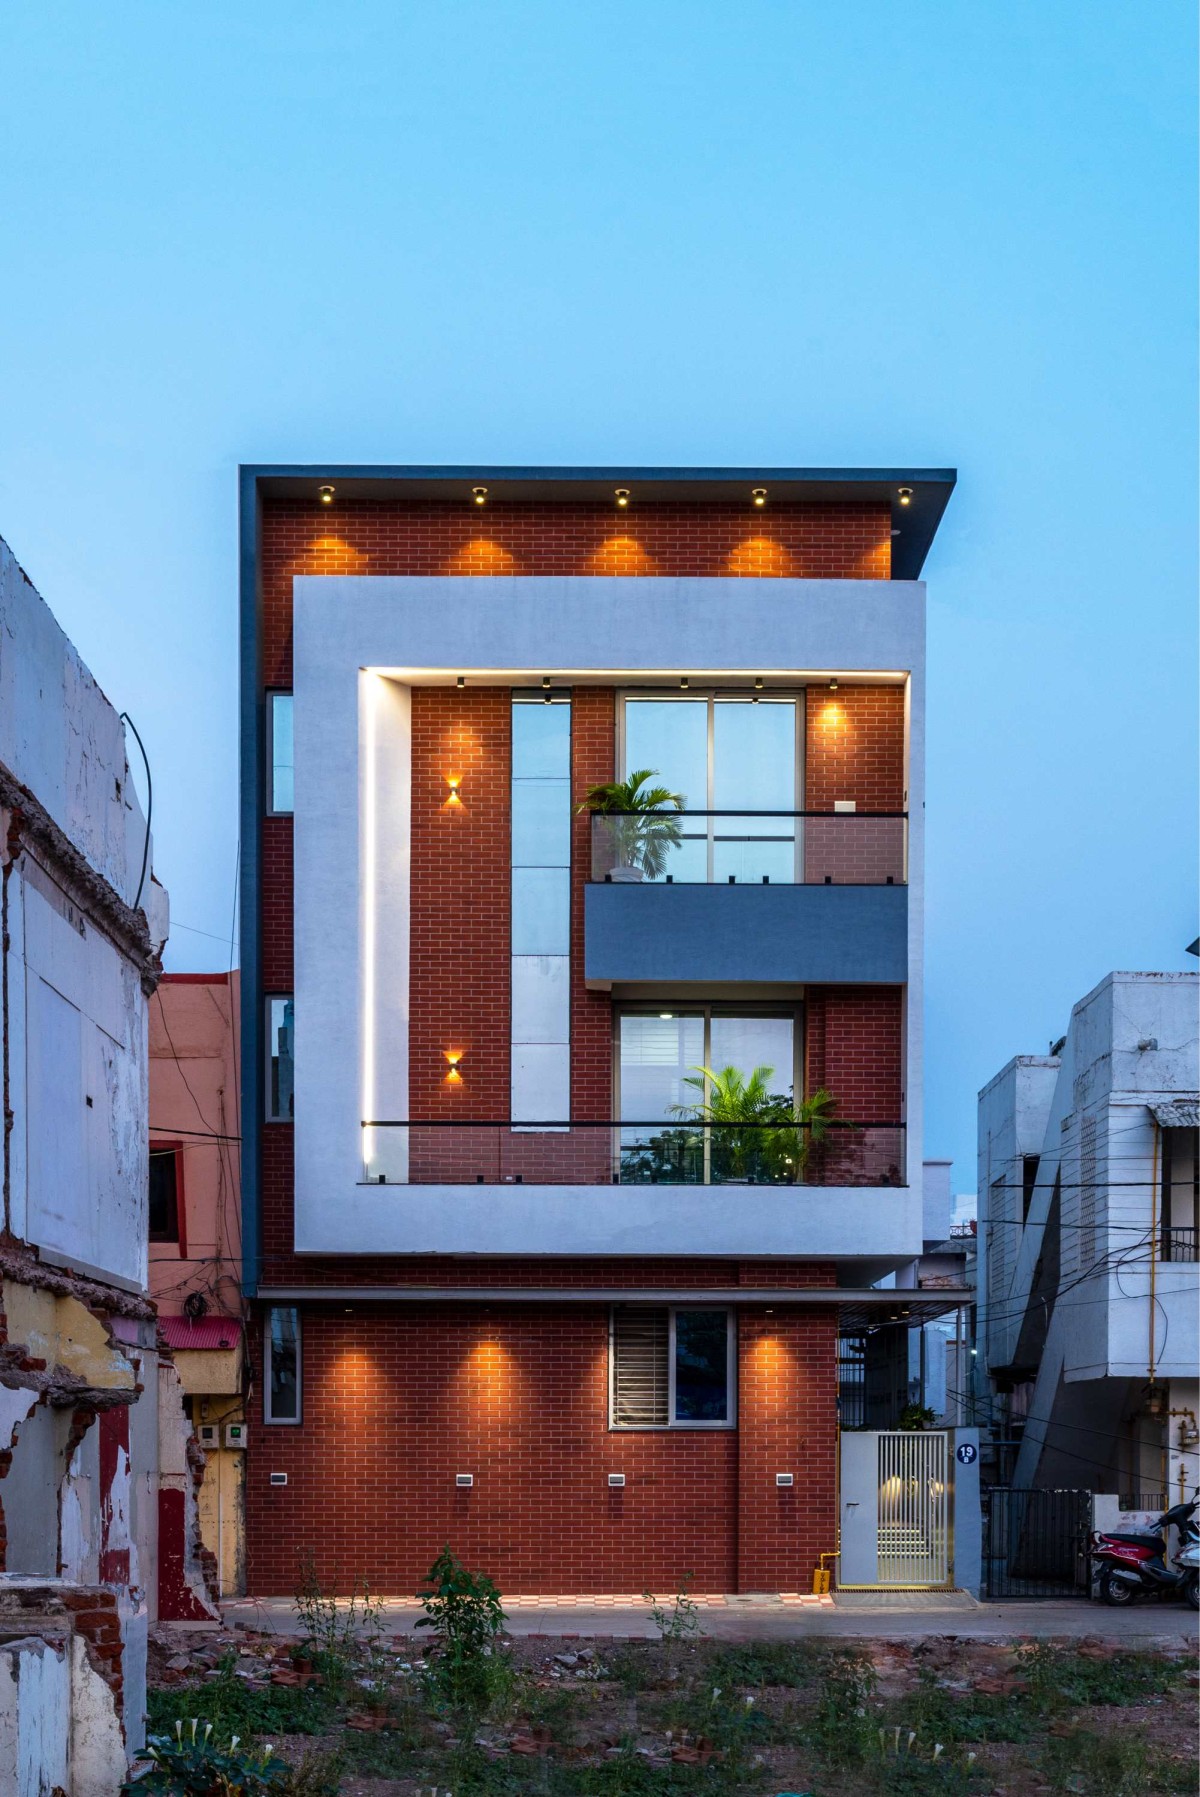 Dusk light exterior view of Parekh's Residence by J Architects